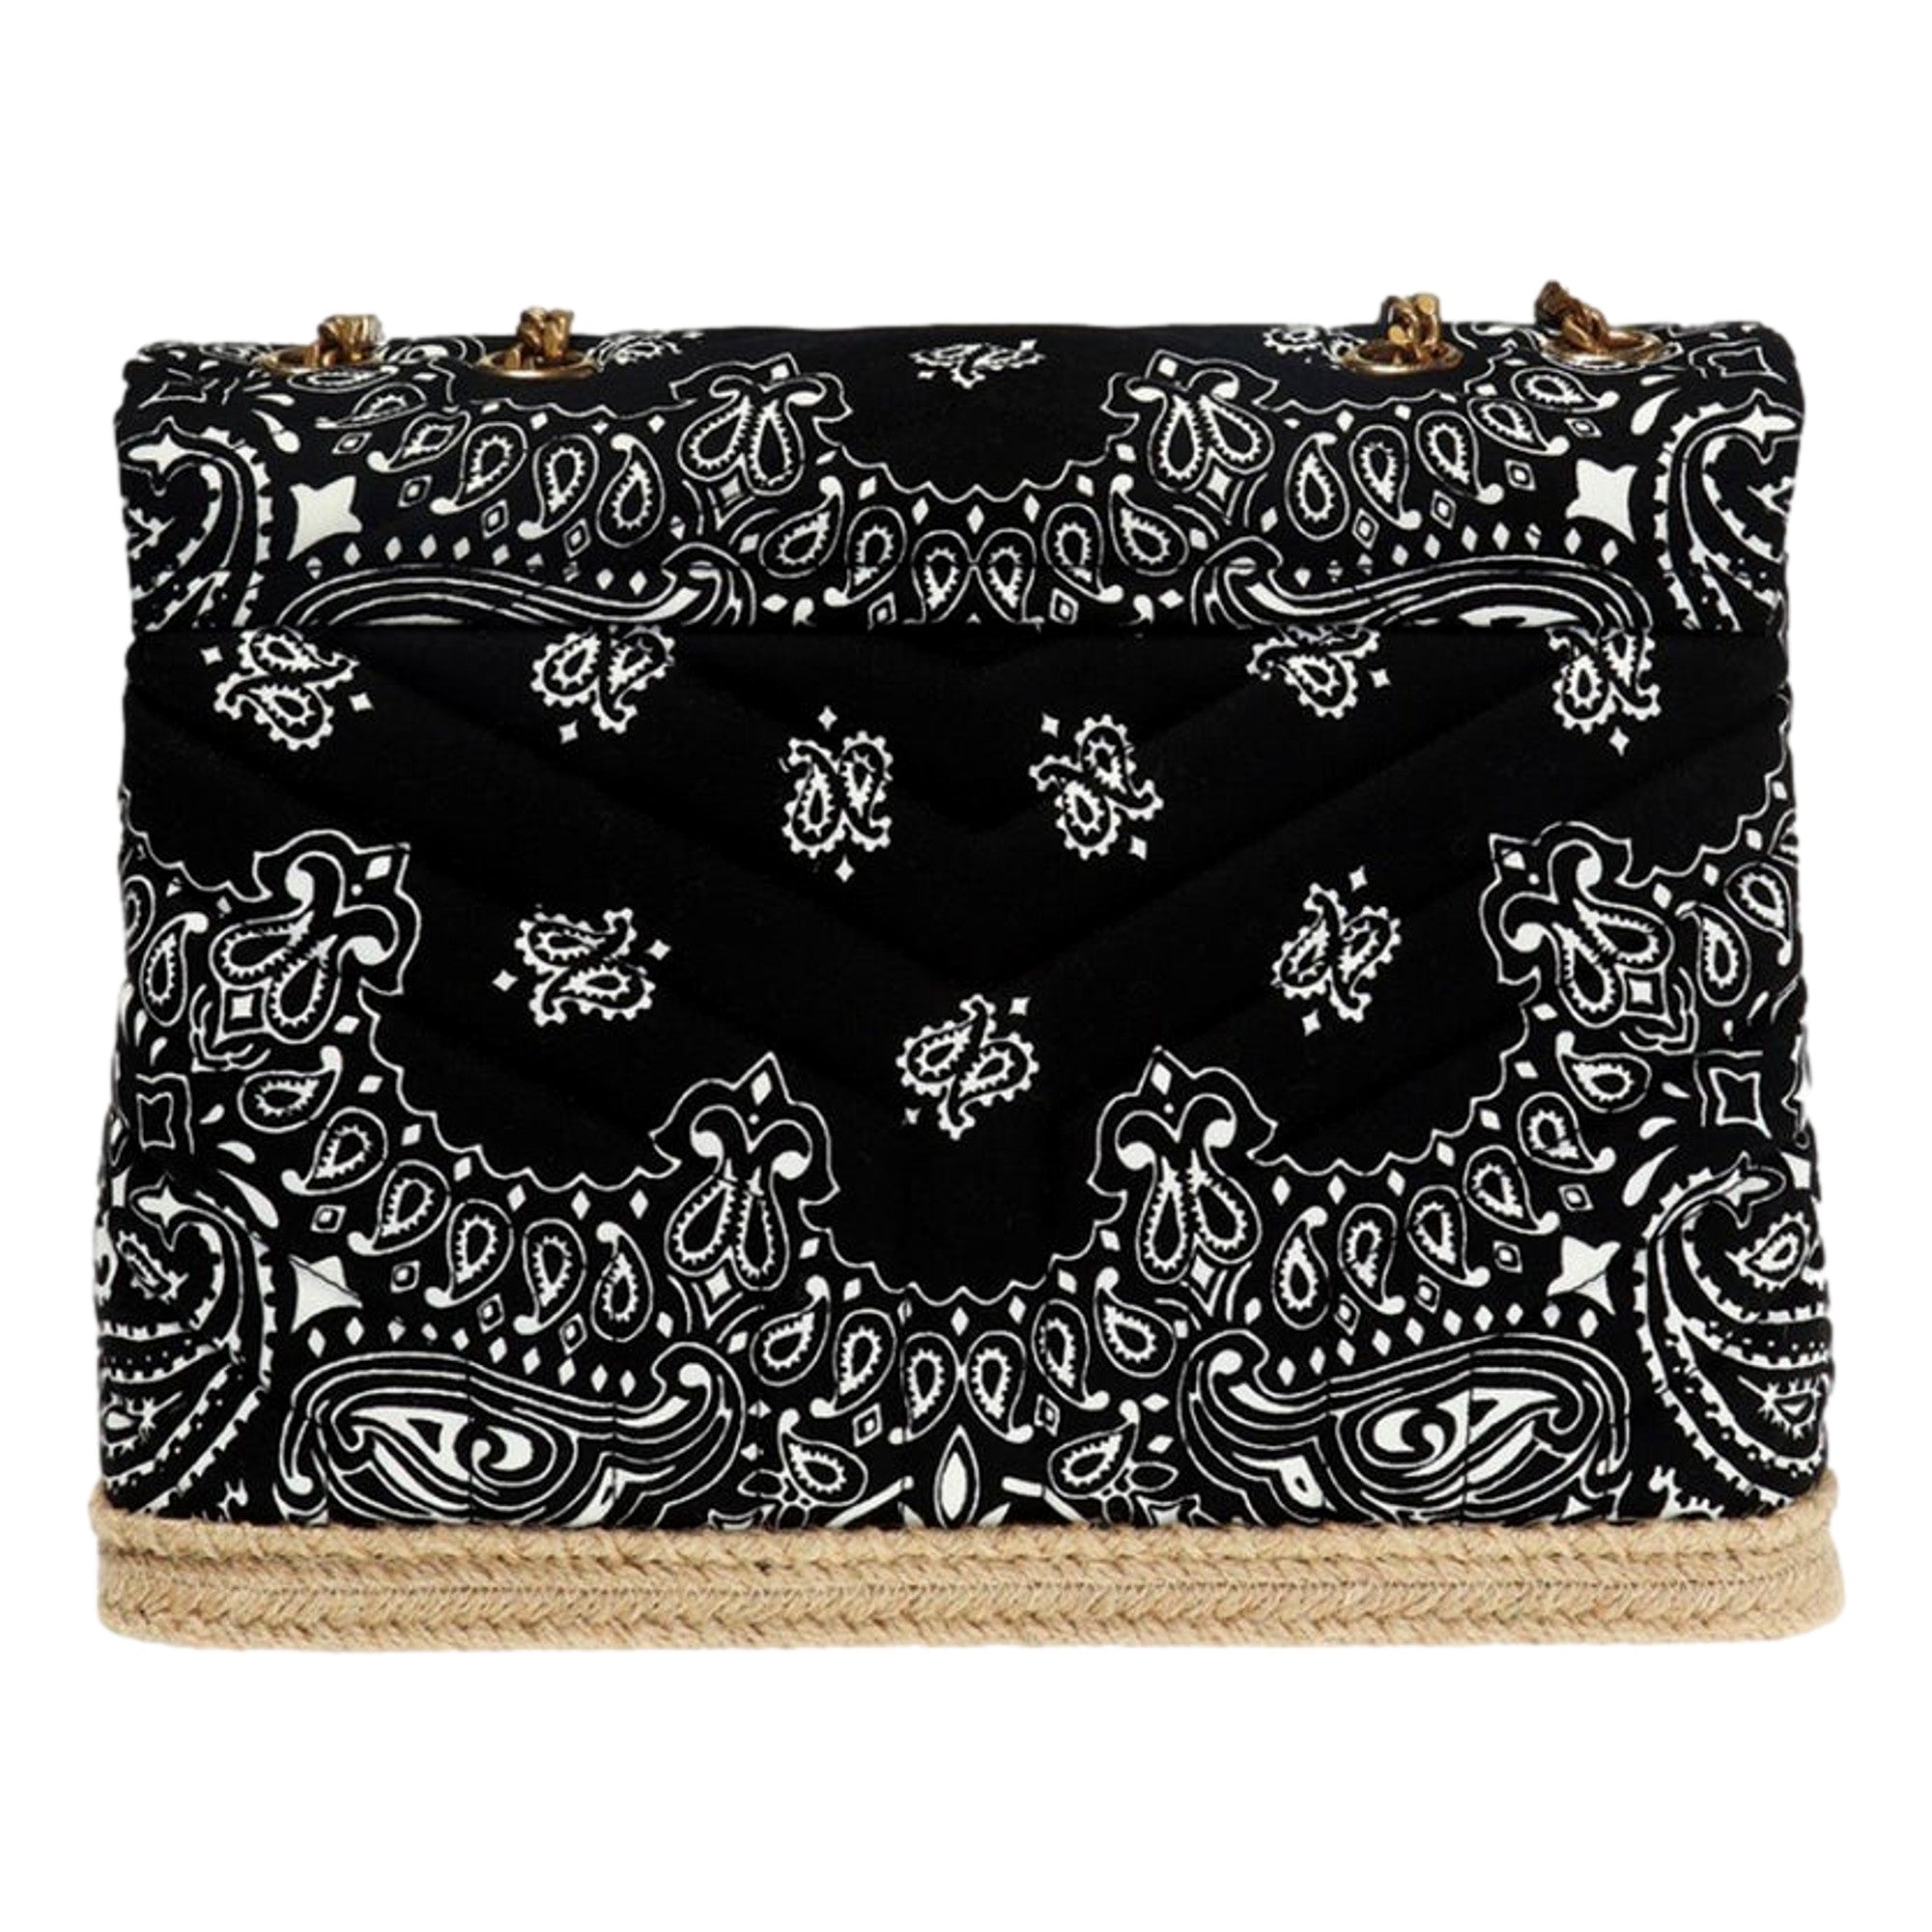 Saint Laurent Loulou Black Paisley Quilted Small Cross Body Bag